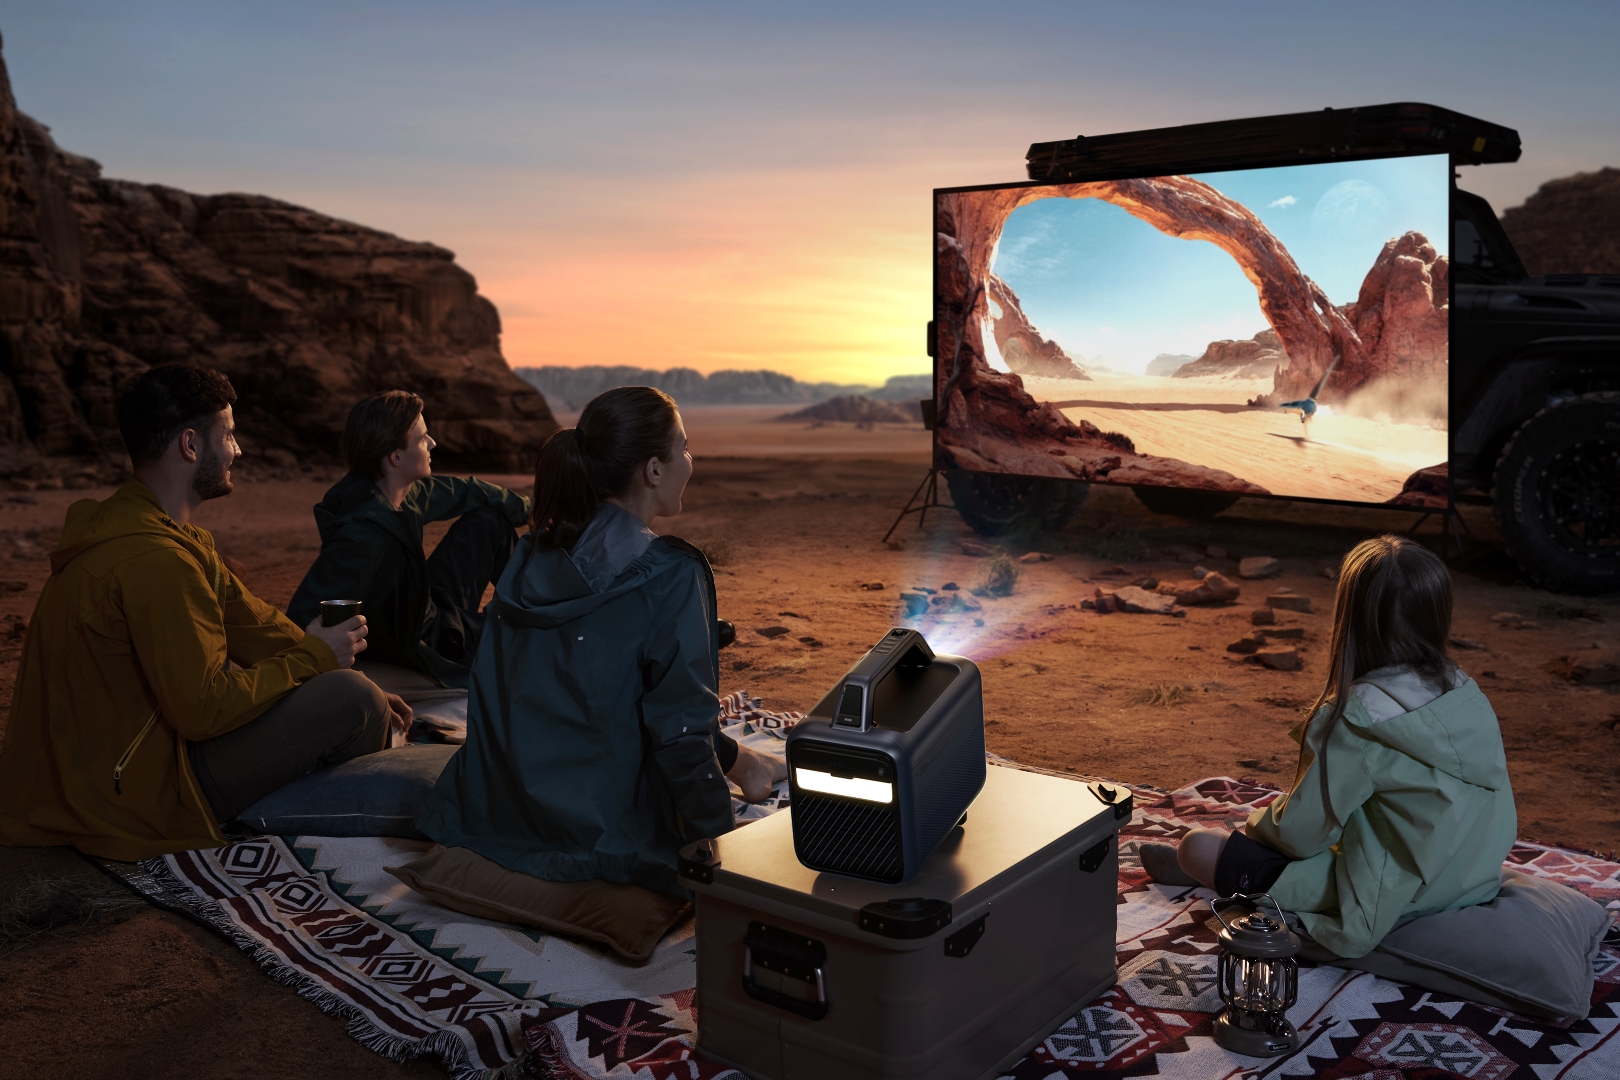 Nebula Mars 3 Air: A projector that goes beyond the boundaries of home  theater